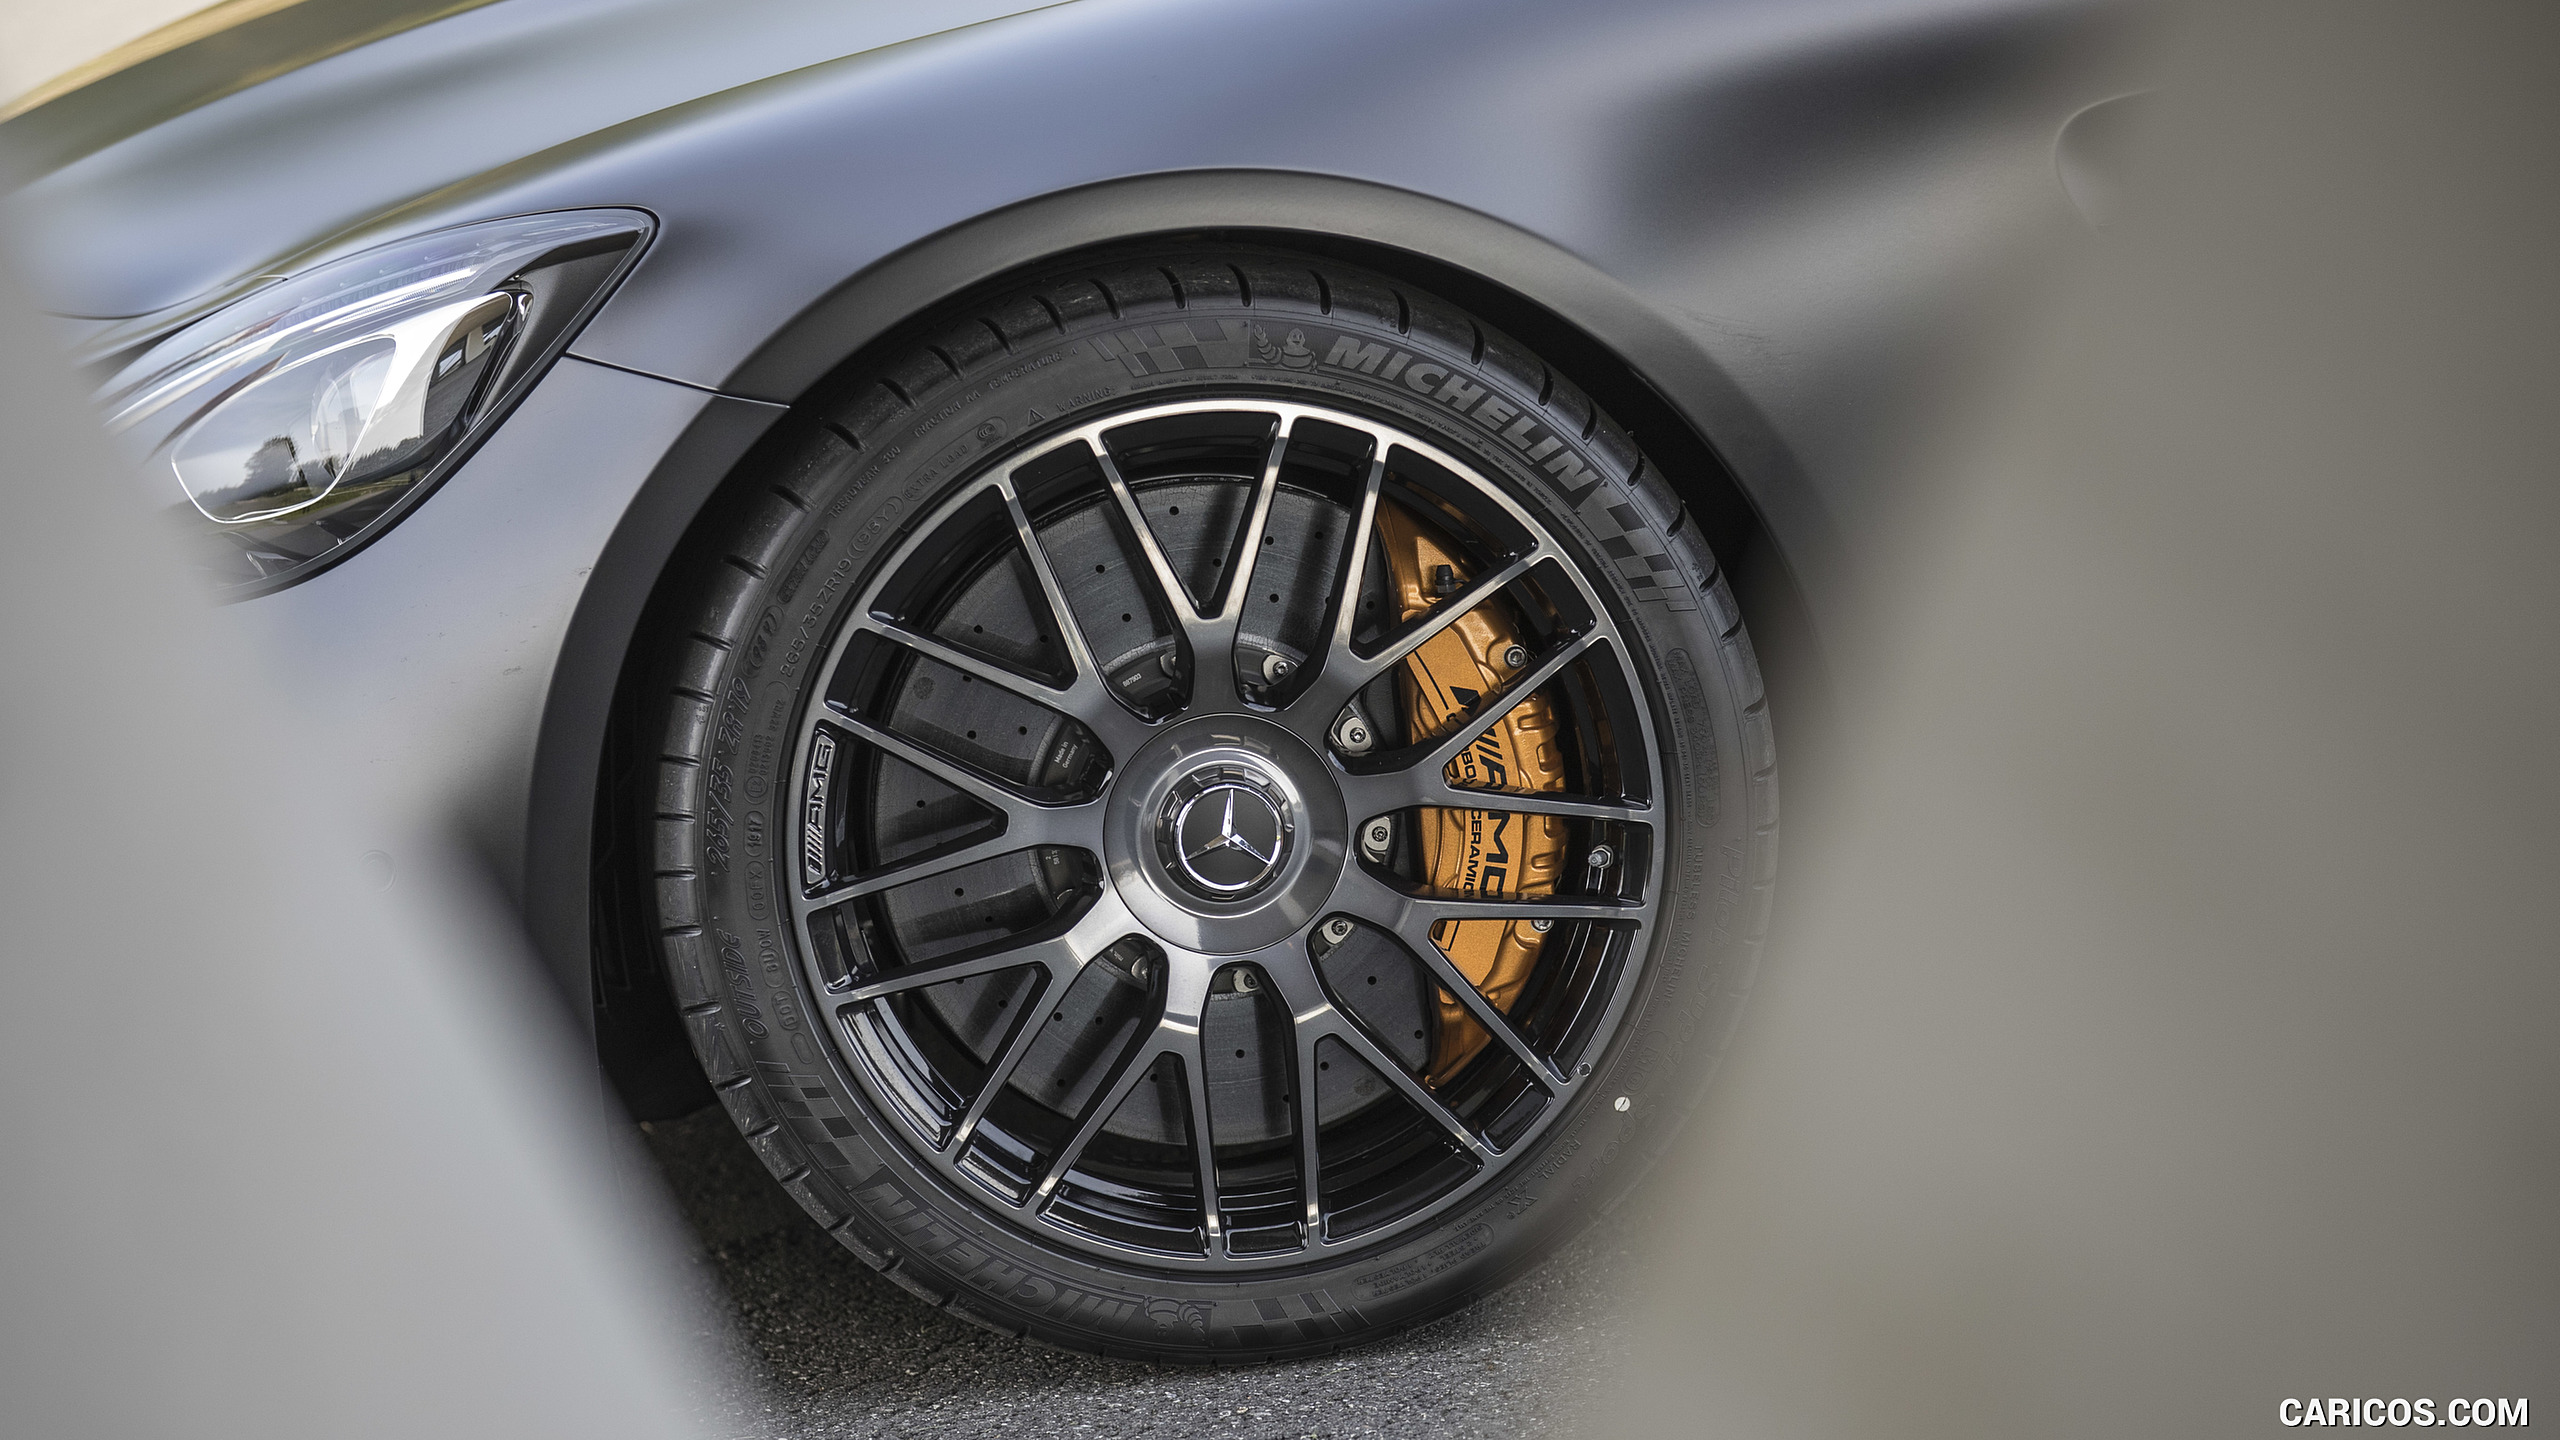 2018 Mercedes-AMG GT C Coupe Edition 50 - Wheel, #45 of 70